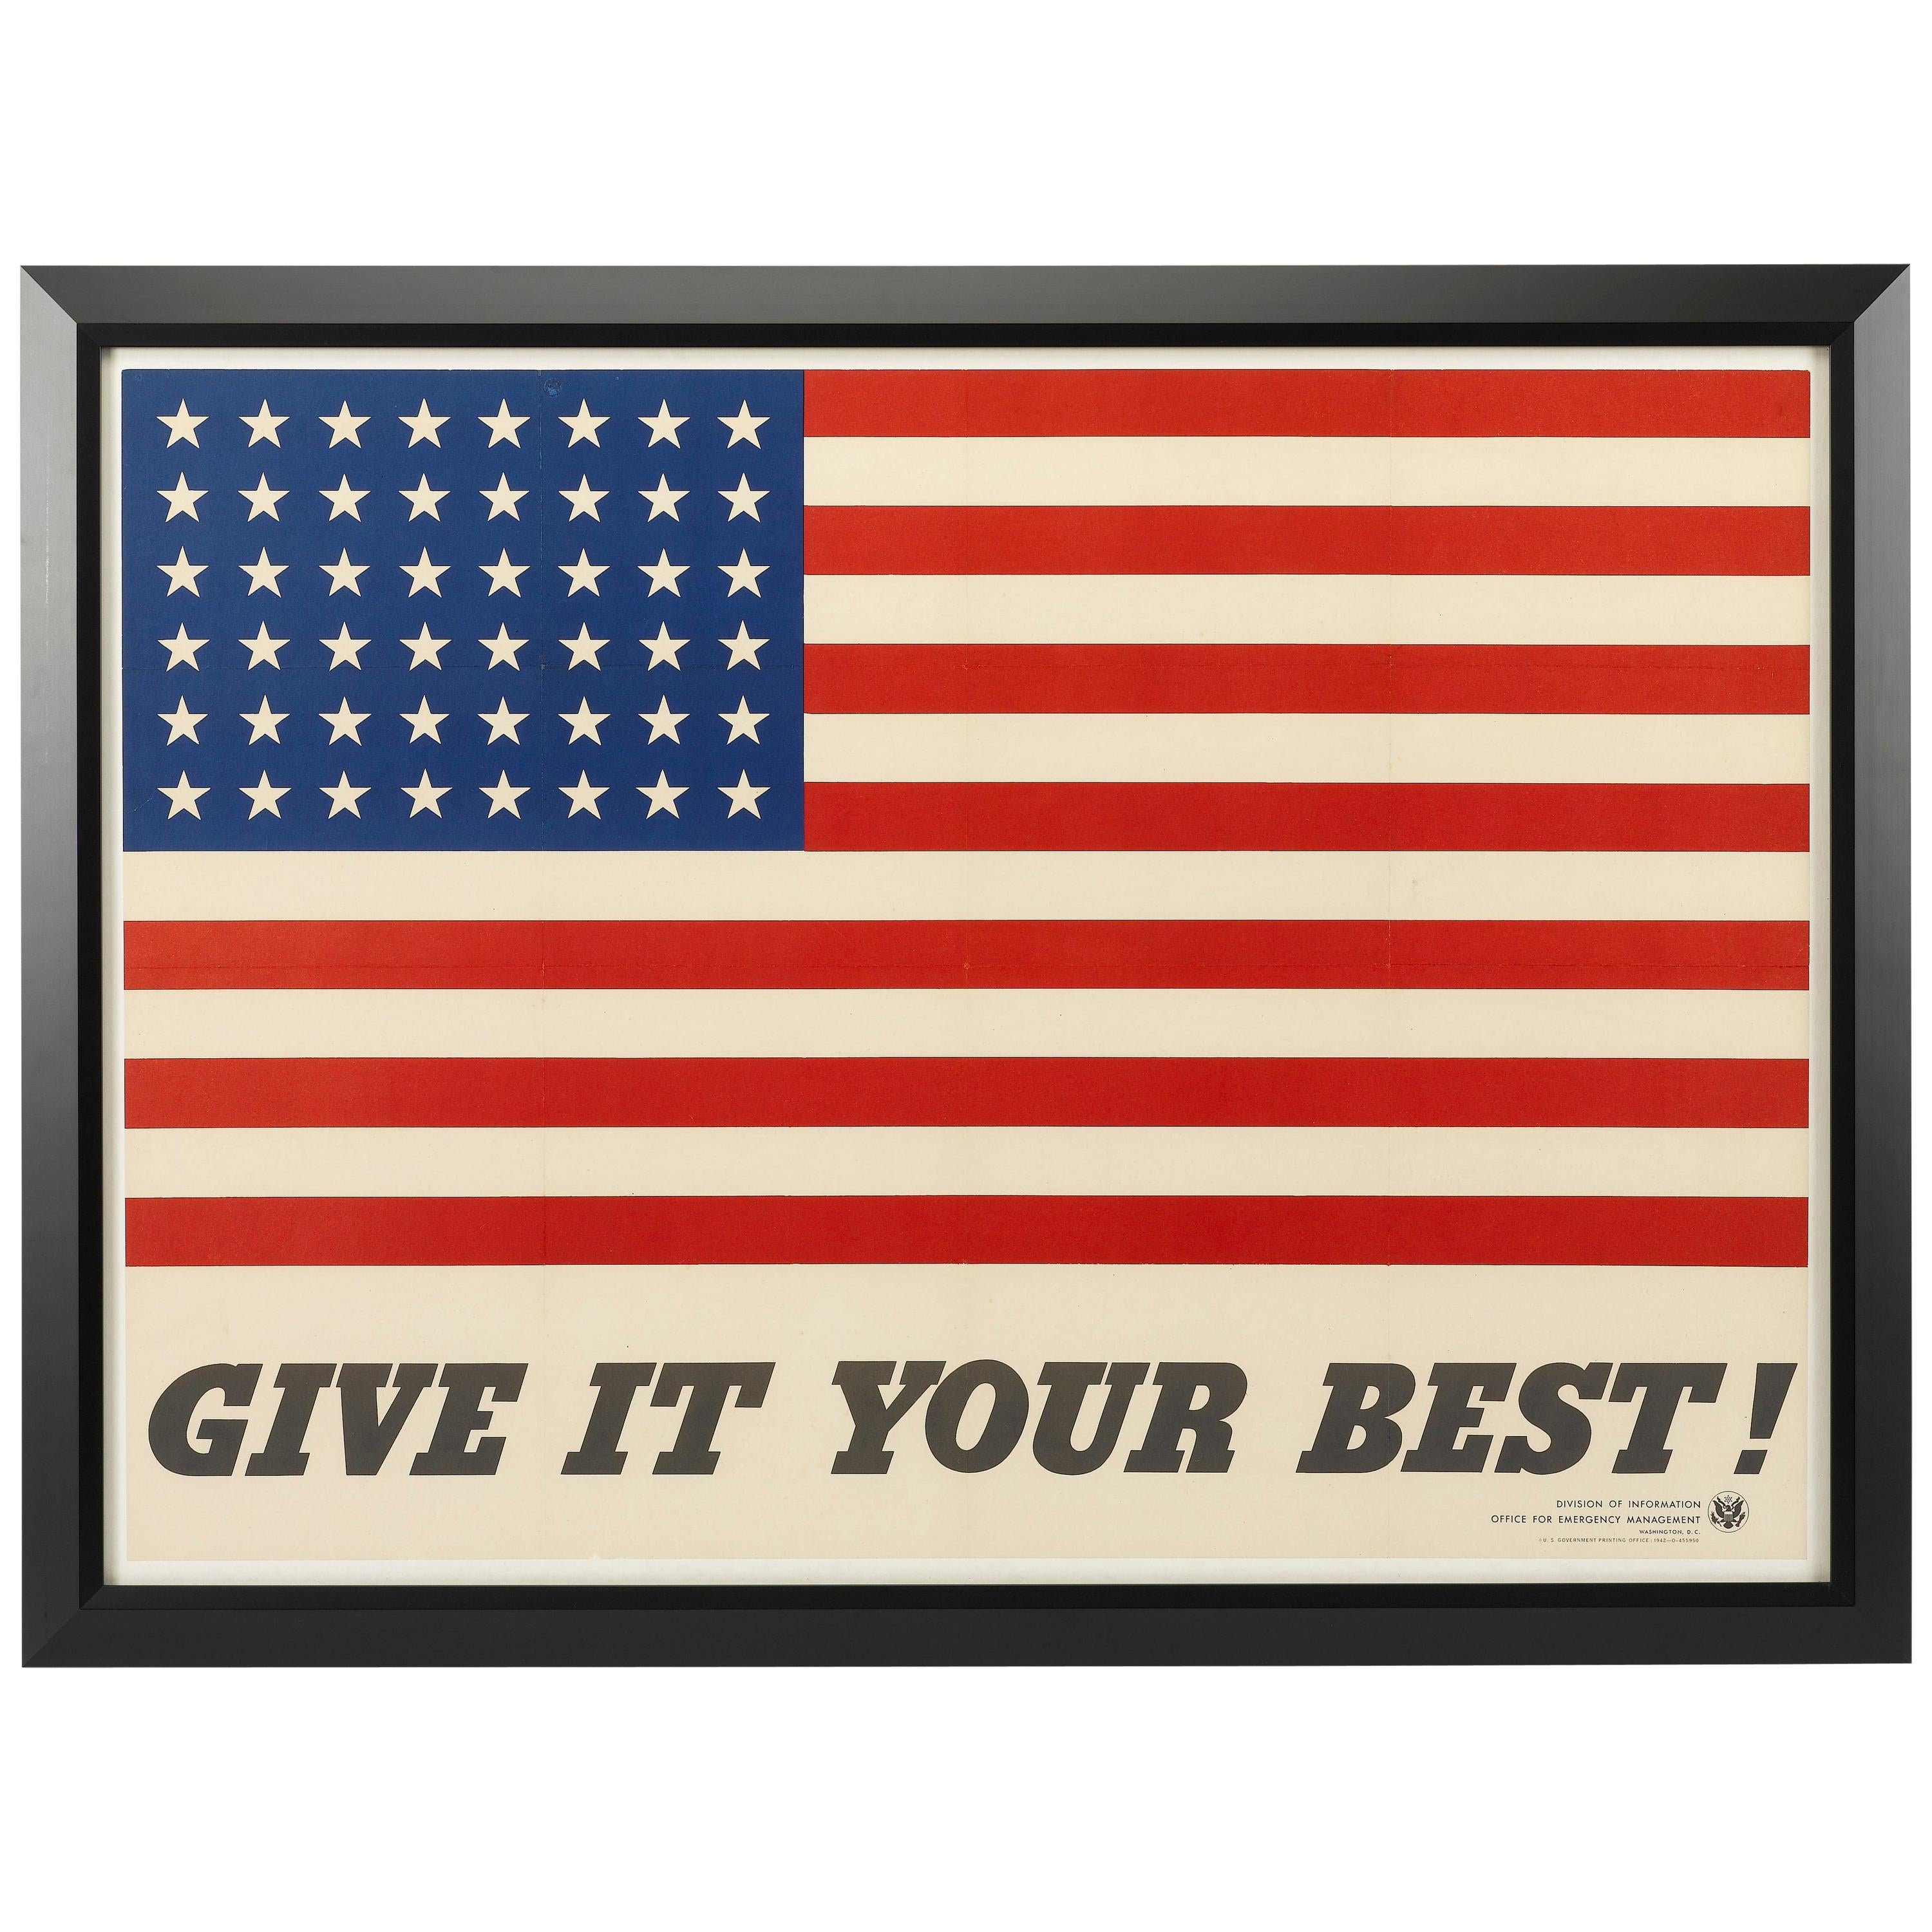 "Give It Your Best!" American 48-Star Flag World War II Poster, circa 1942